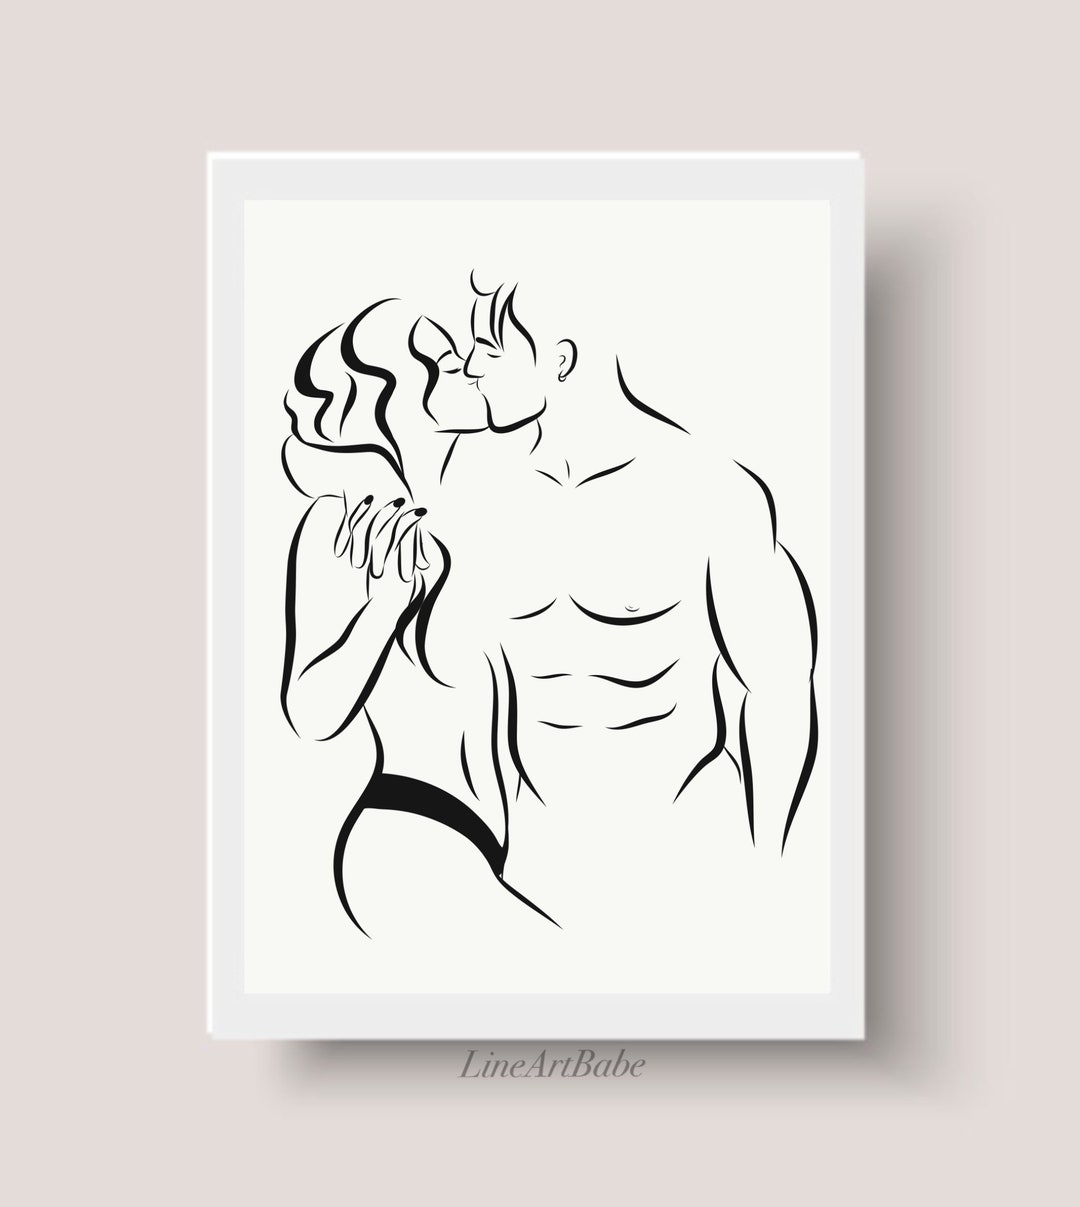 Line Art Couple Kiss Minimalist Lovers Holding Hands Drawing pic